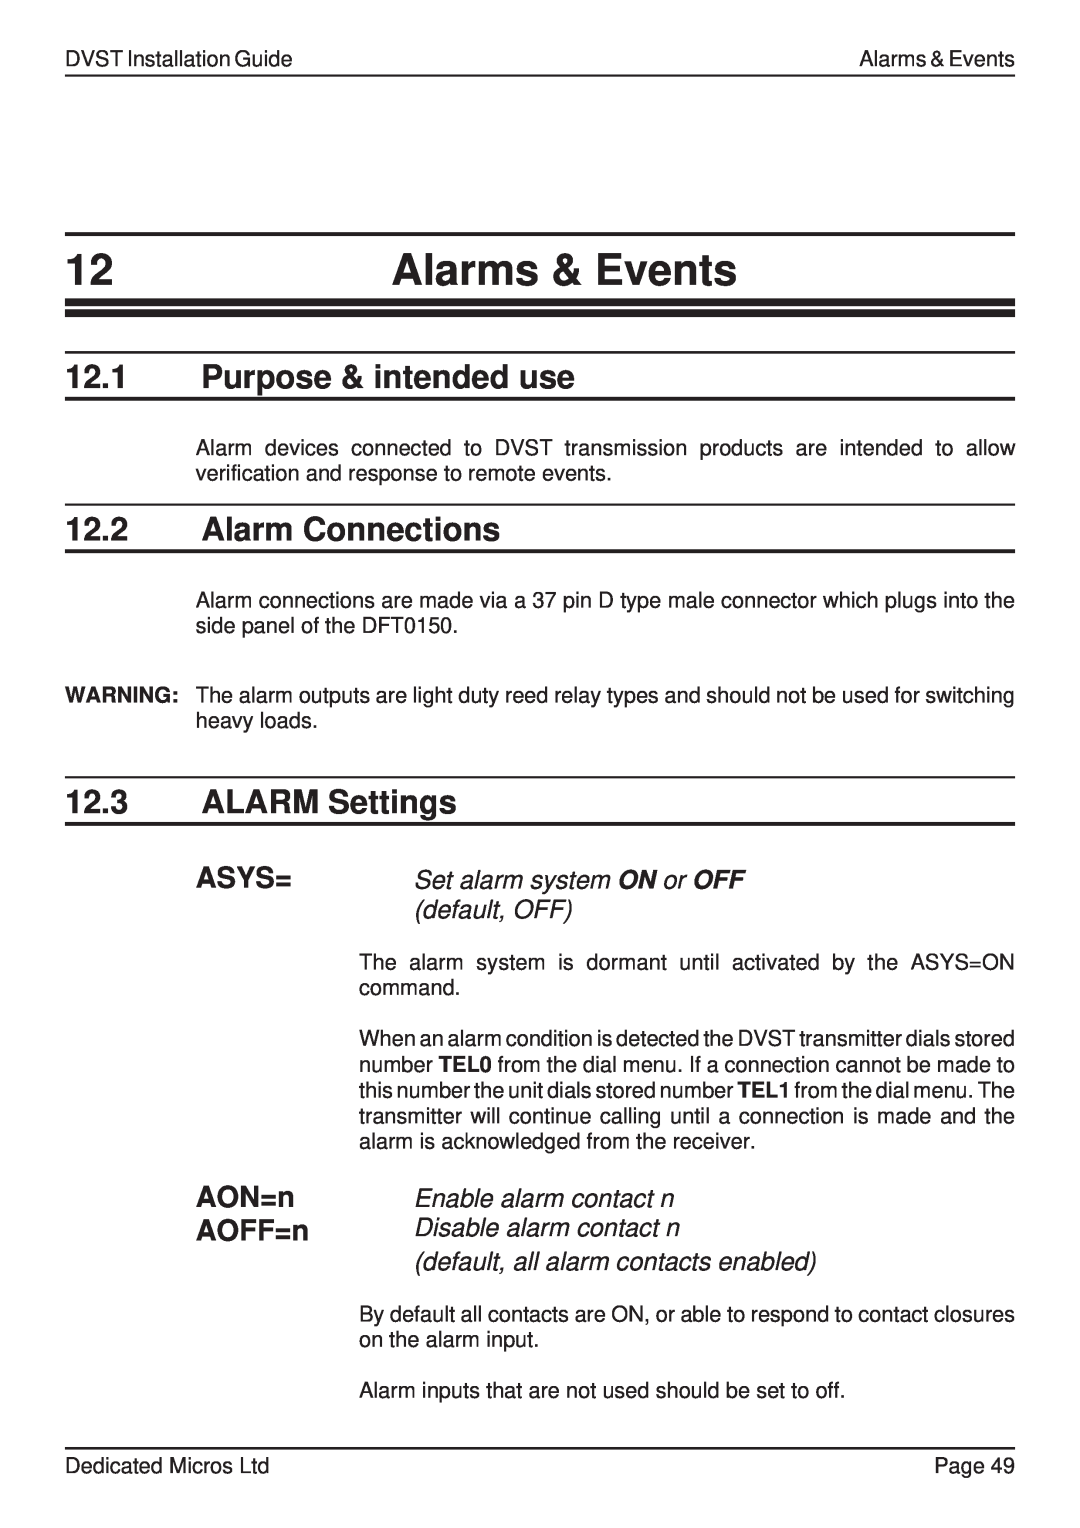 Guardian Technologies DFT 150/175 Alarms & Events, 12.1Purpose & intended use, 12.2Alarm Connections, 12.3ALARM Settings 